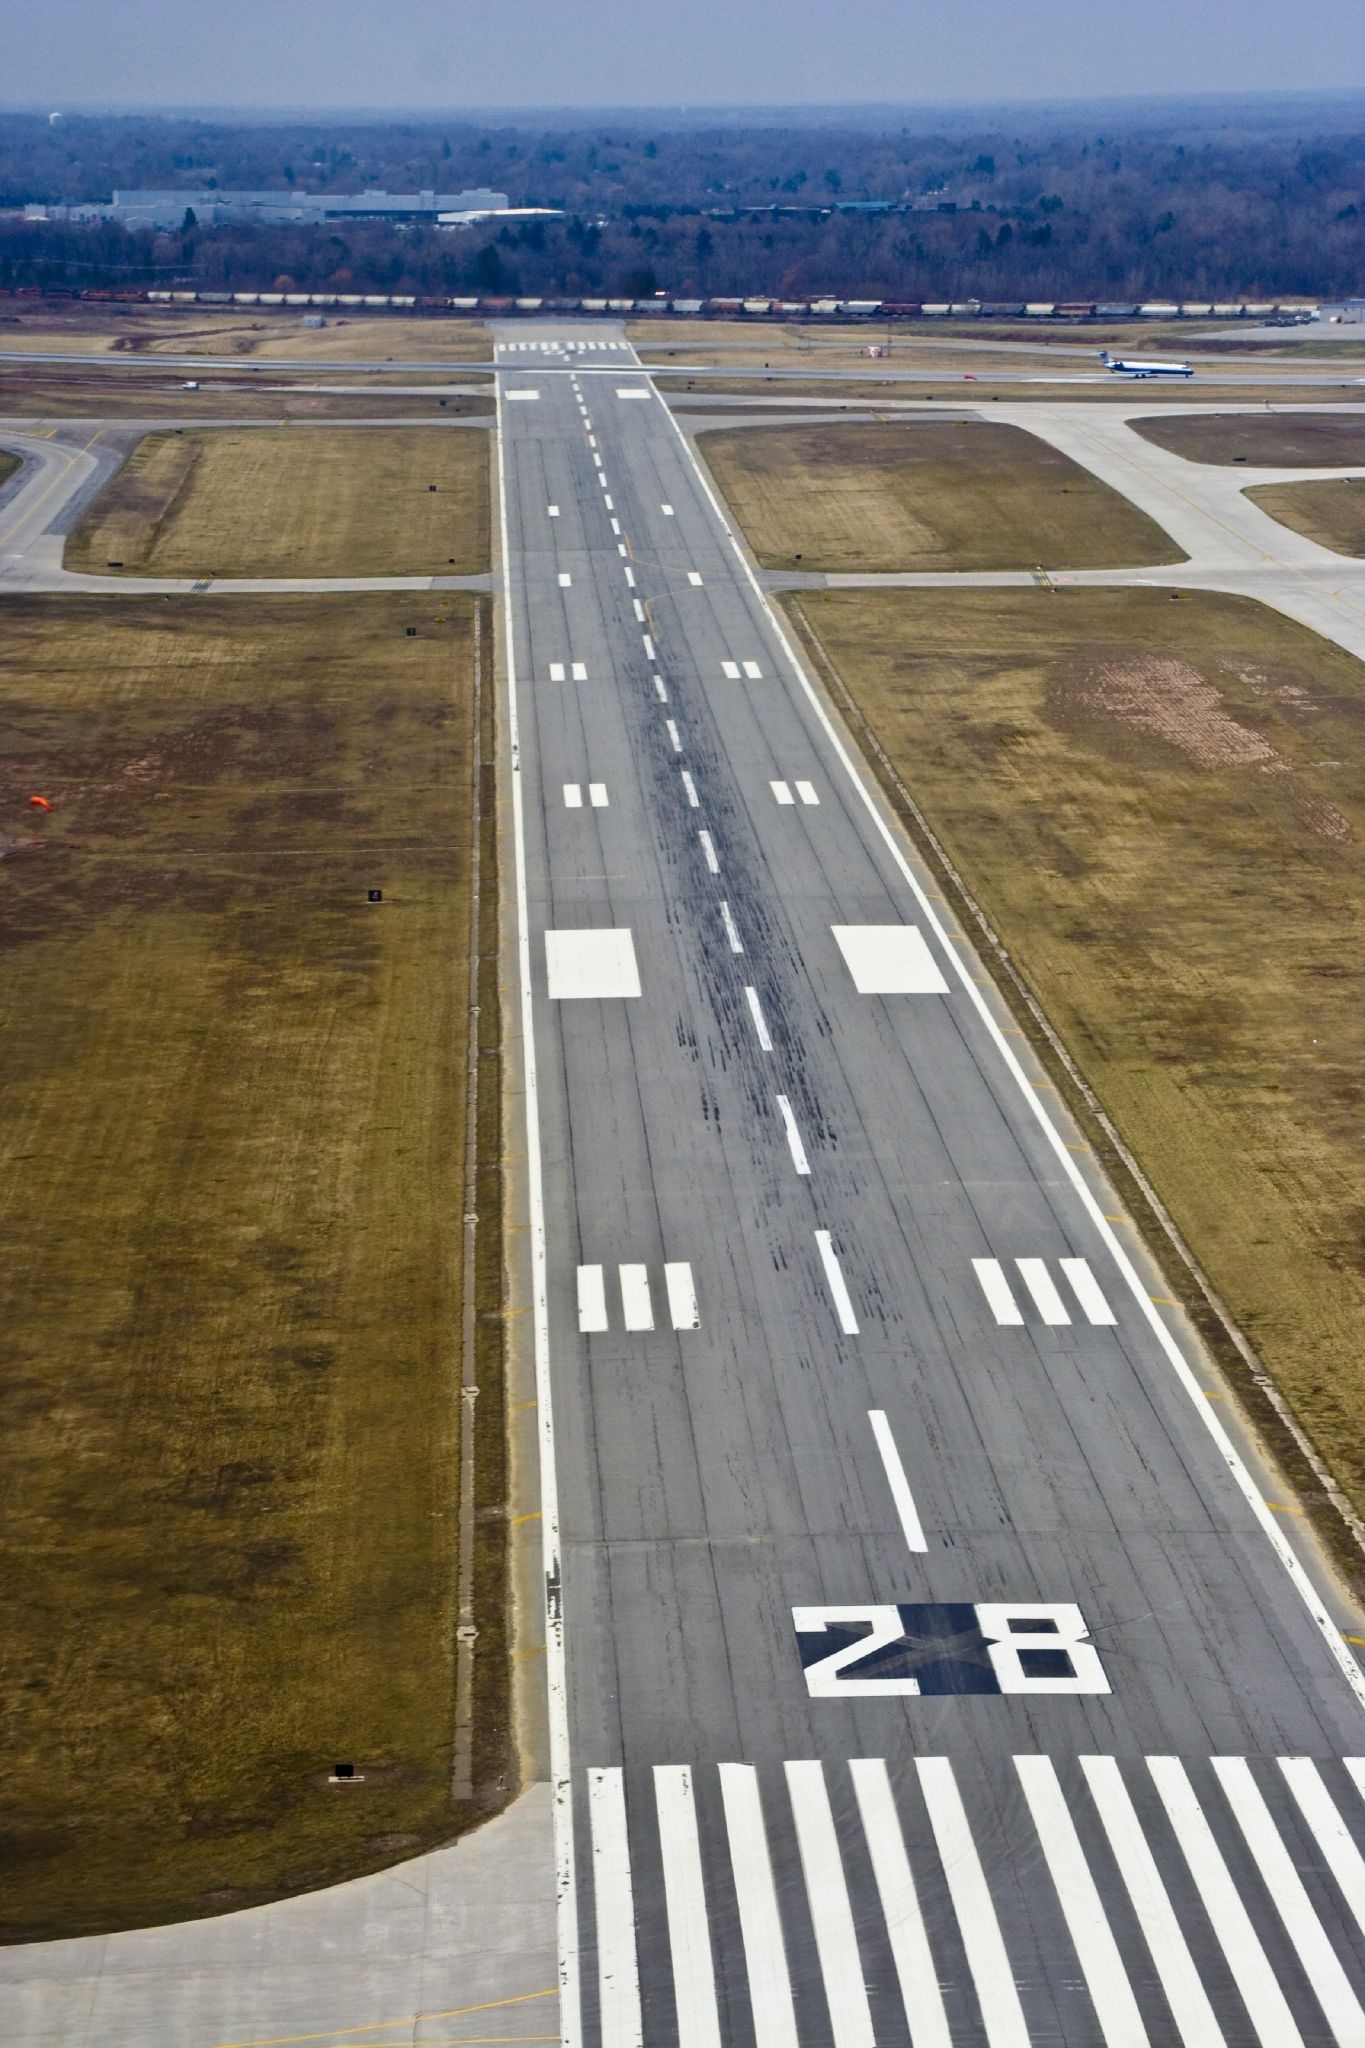 Is there a runway 1?